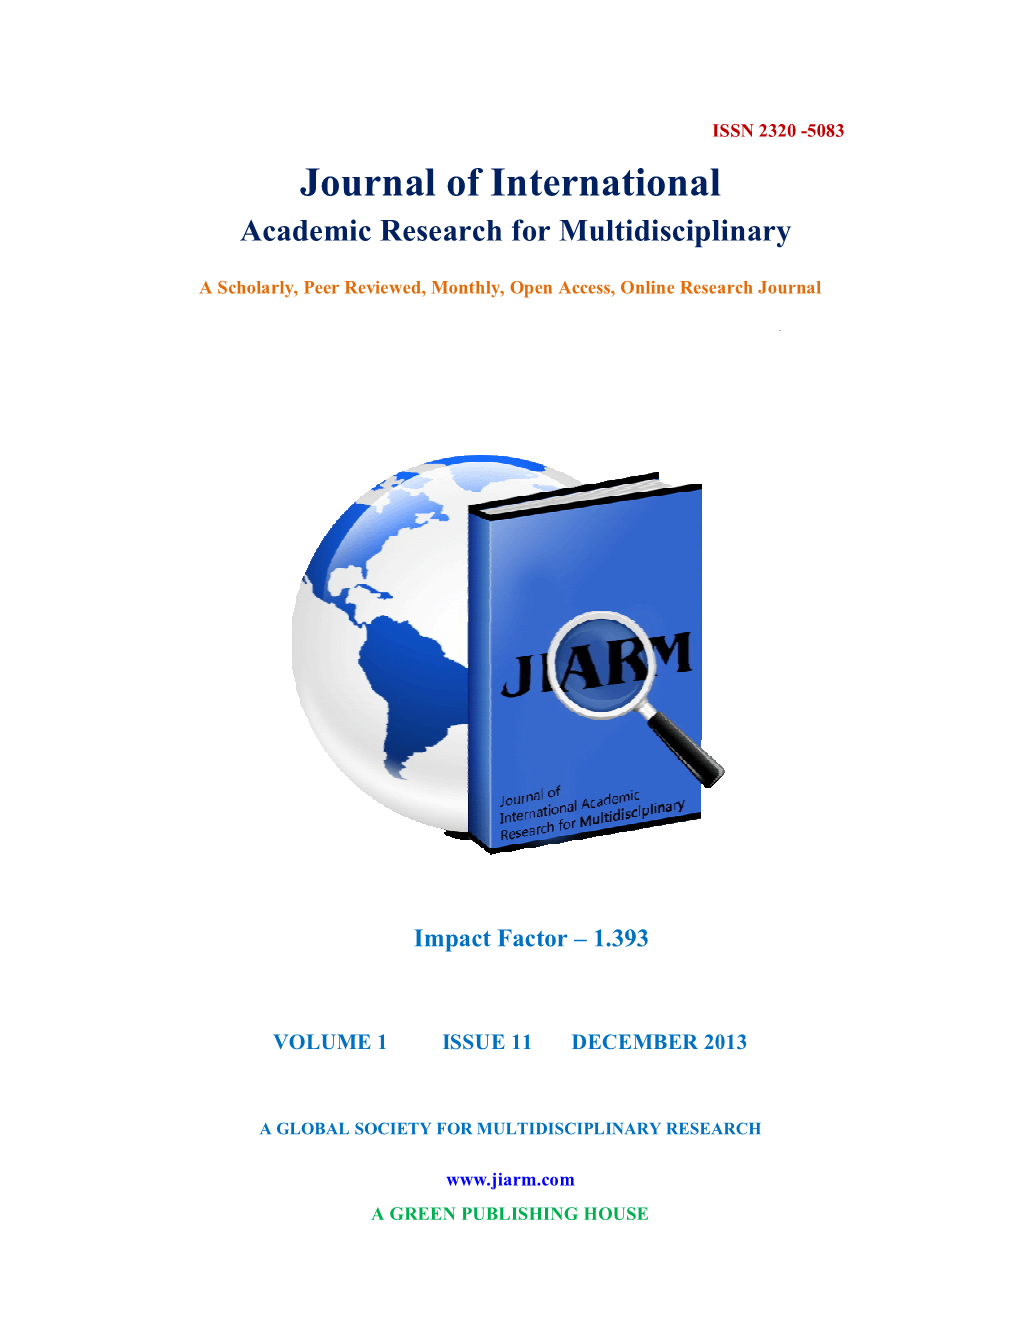 JOURNAL of INTERNATIONAL ACADEMIC RESEARCH for MULTIDISCIPLINARY Impact Factor 1.393, ISSN: 2320-5083, Volume 1, Issue 11, December 2013